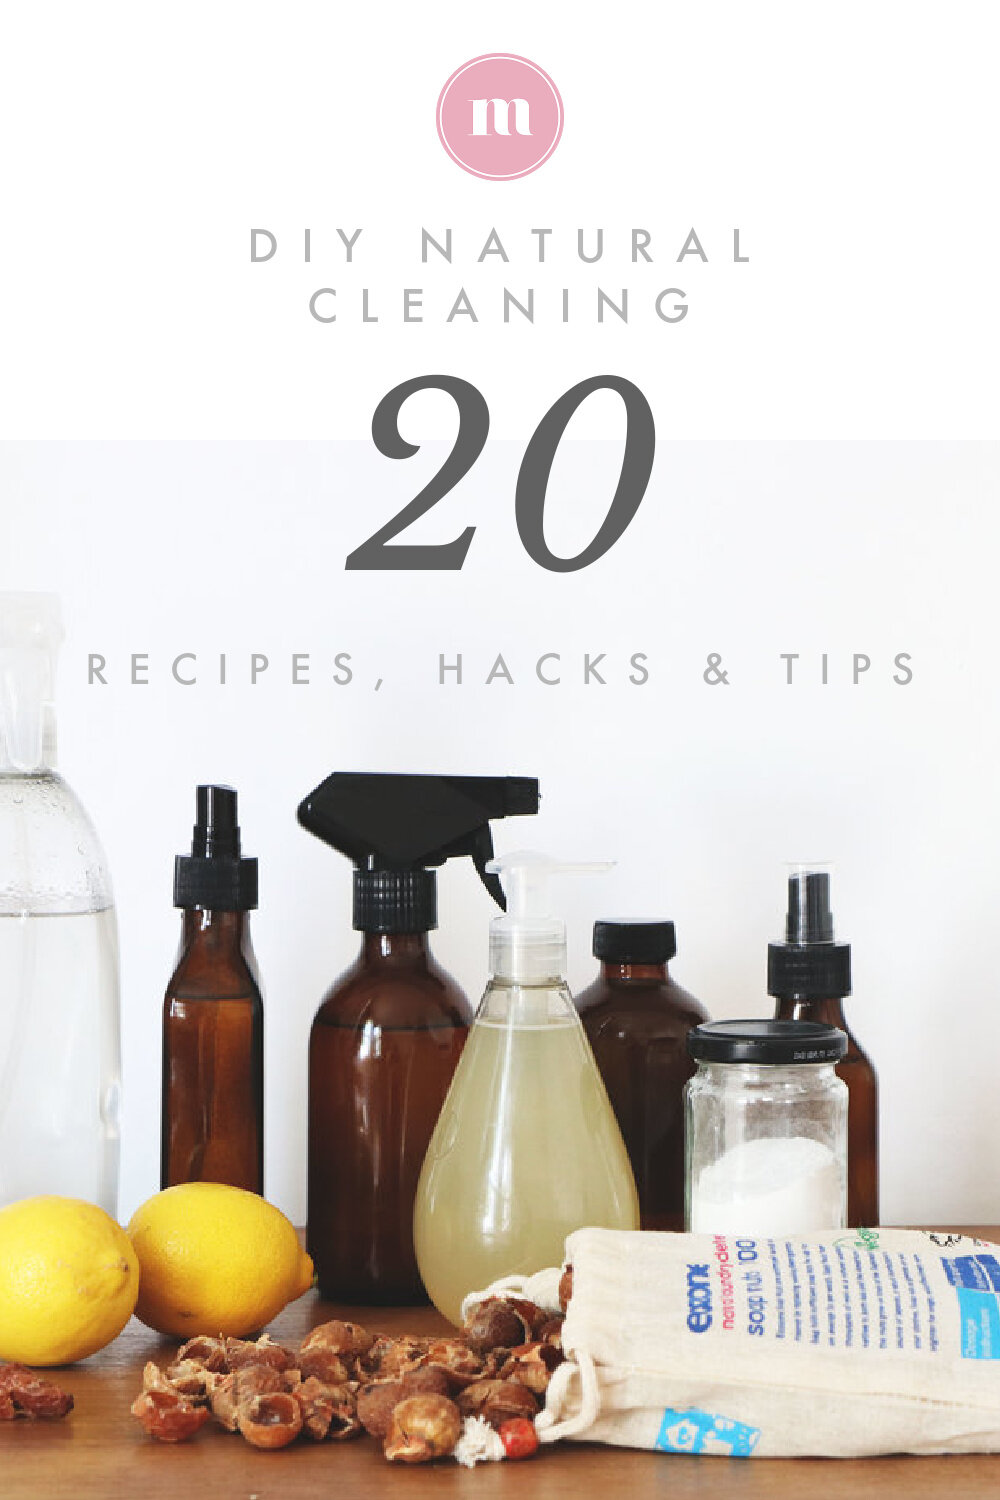 8 Best wash walls ideas  diy cleaning products, cleaners homemade, cleaning  hacks